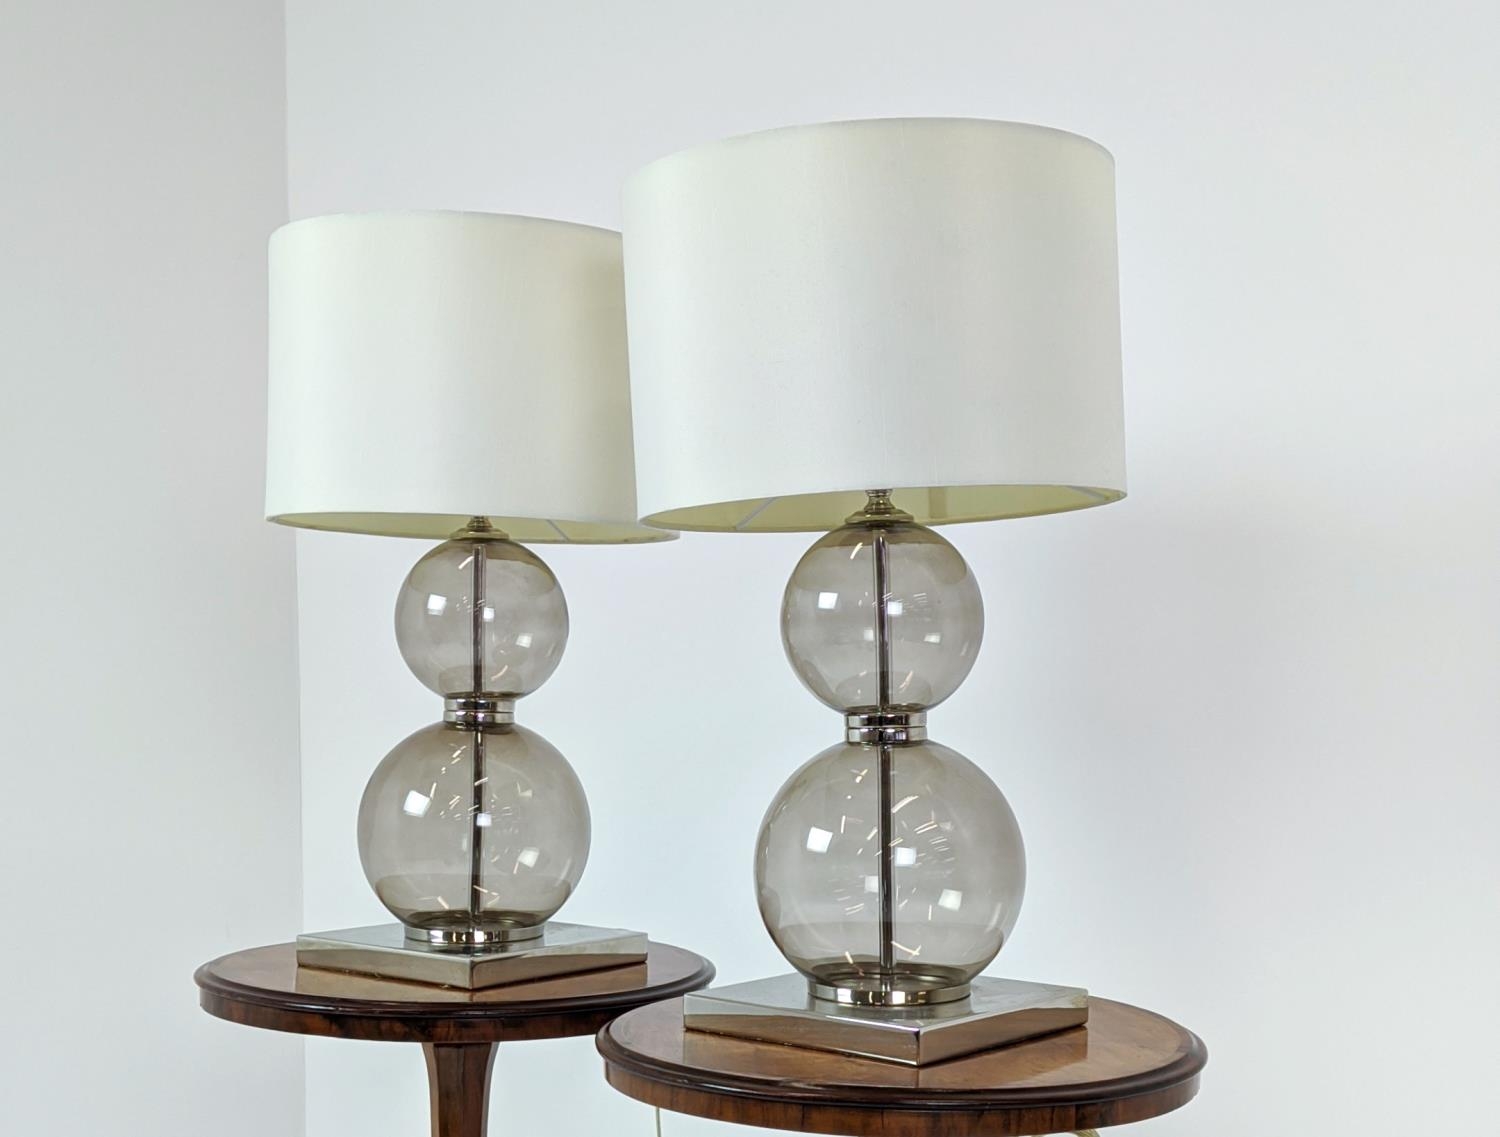 TABLE LAMPS, a pair, glass ball stems on square polished metal bases, 61cm H x 35cm W in shades. (2) - Image 3 of 6